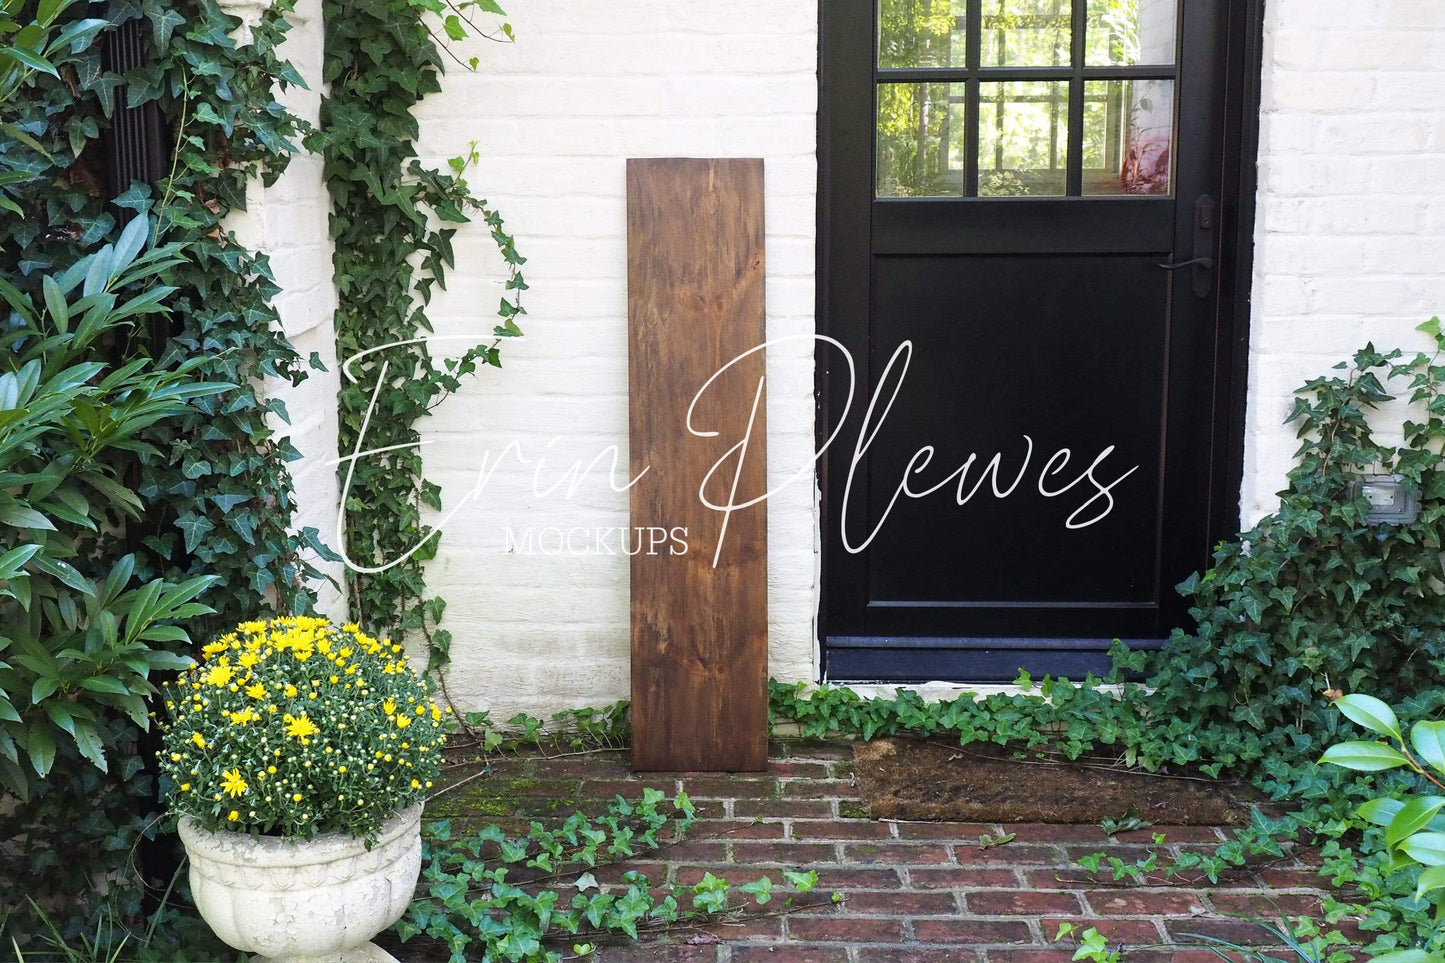 Erin Plewes Mockups Porch Sign Mockup Large, Outdoor Sign Mock Up, Fall Wood Frame Mock-up 1 ft x 4 ft, Farmhouse Style Sign Stock Photo